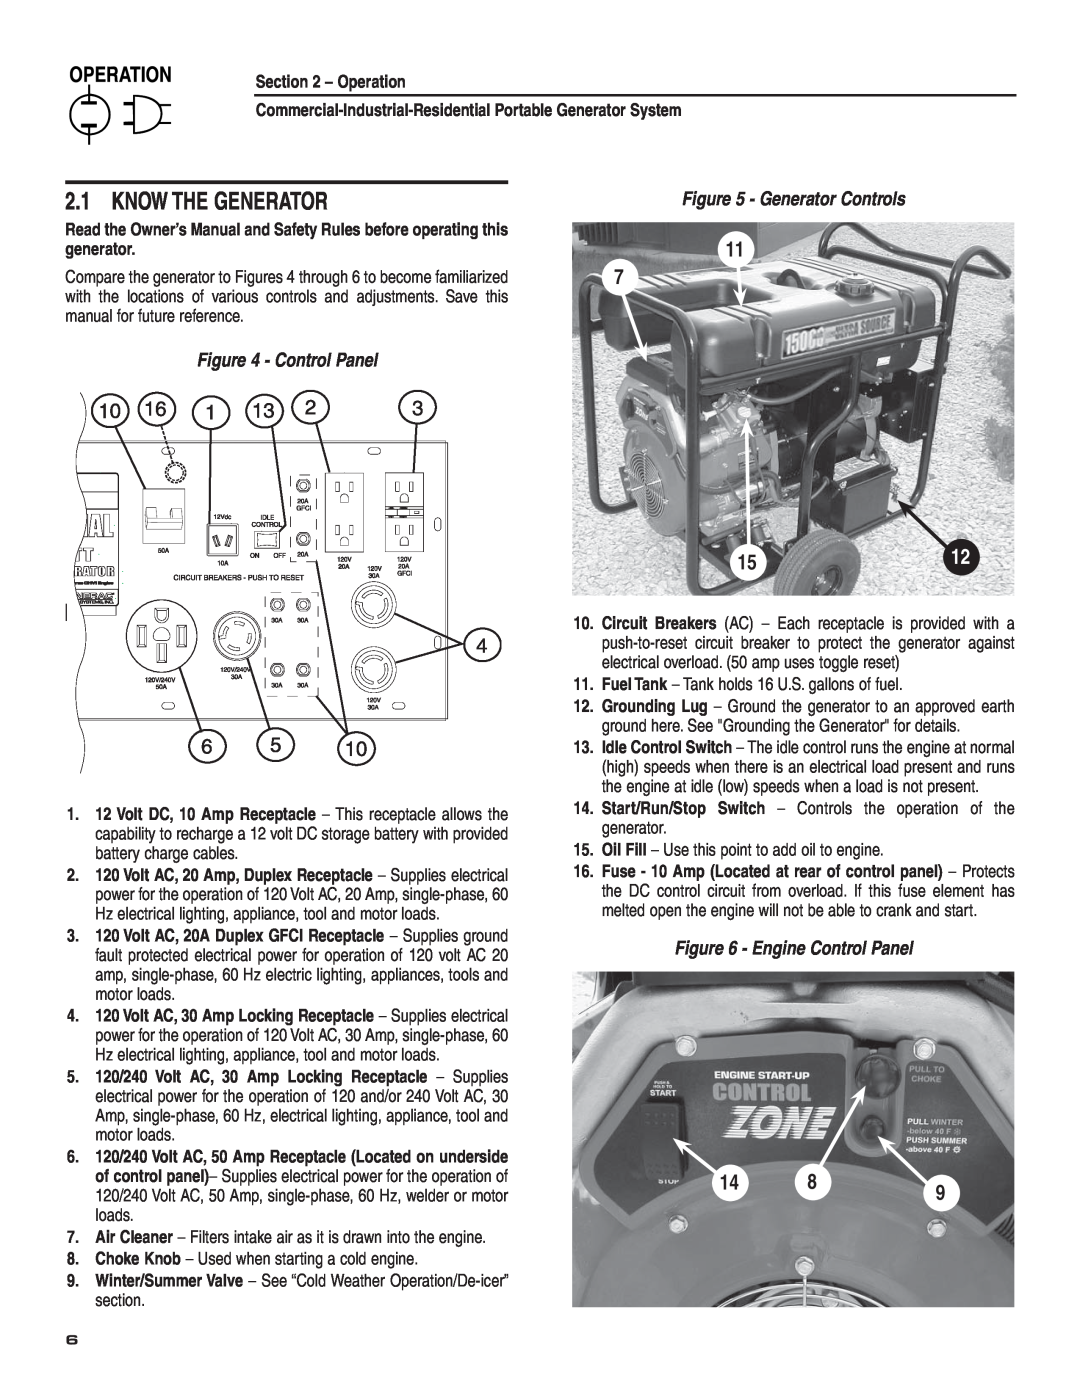 Guardian Technologies 004582-2 owner manual Know The Generator, 11 7 1512, Generator Controls, Engine Control Panel 